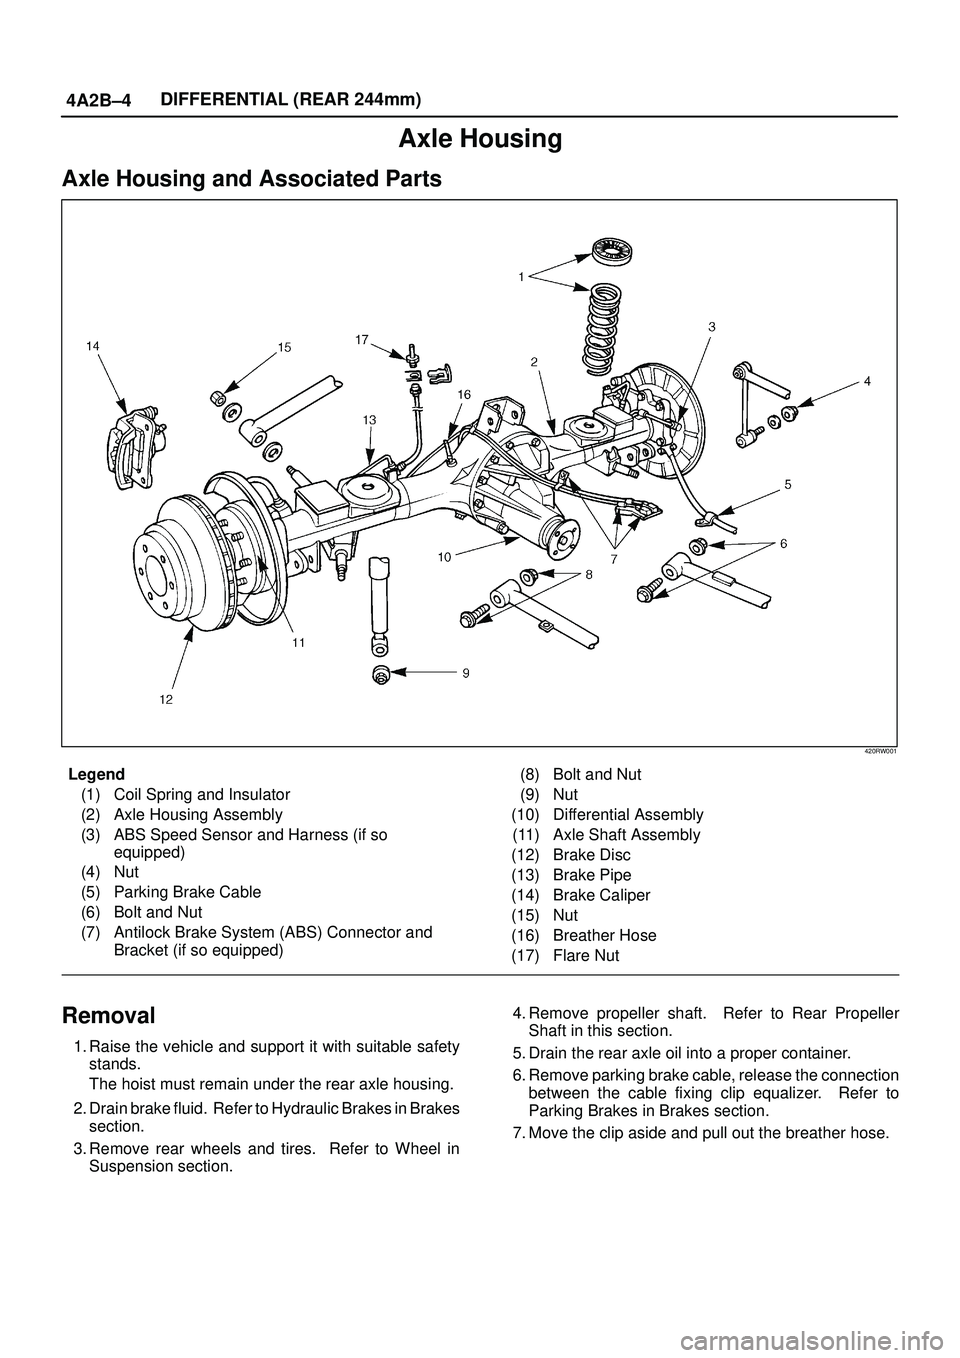 ISUZU TROOPER 1998  Service Owners Guide 4A2B±4DIFFERENTIAL (REAR 244mm)
Axle Housing
Axle Housing and Associated Parts
420RW001
Legend
(1) Coil Spring and Insulator
(2) Axle Housing Assembly
(3) ABS Speed Sensor and Harness (if so
equipped